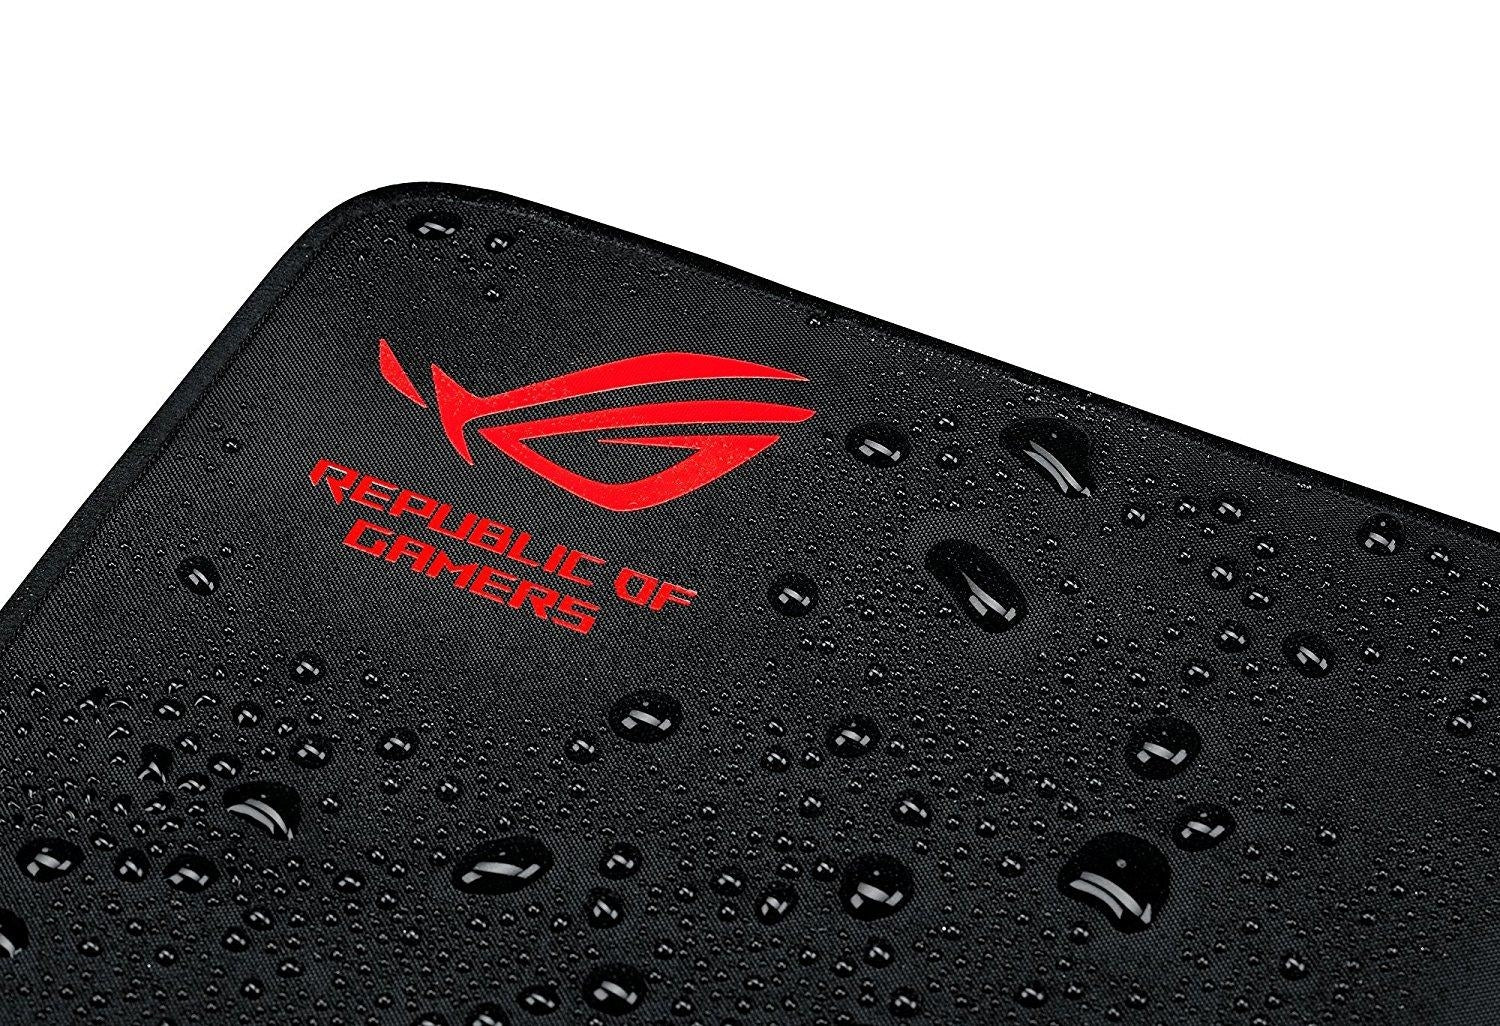 Asus Accessory ROG SCABBARD ROG Extended Gaming Mouse Pad With Superior Durability Retail - V&L Canada